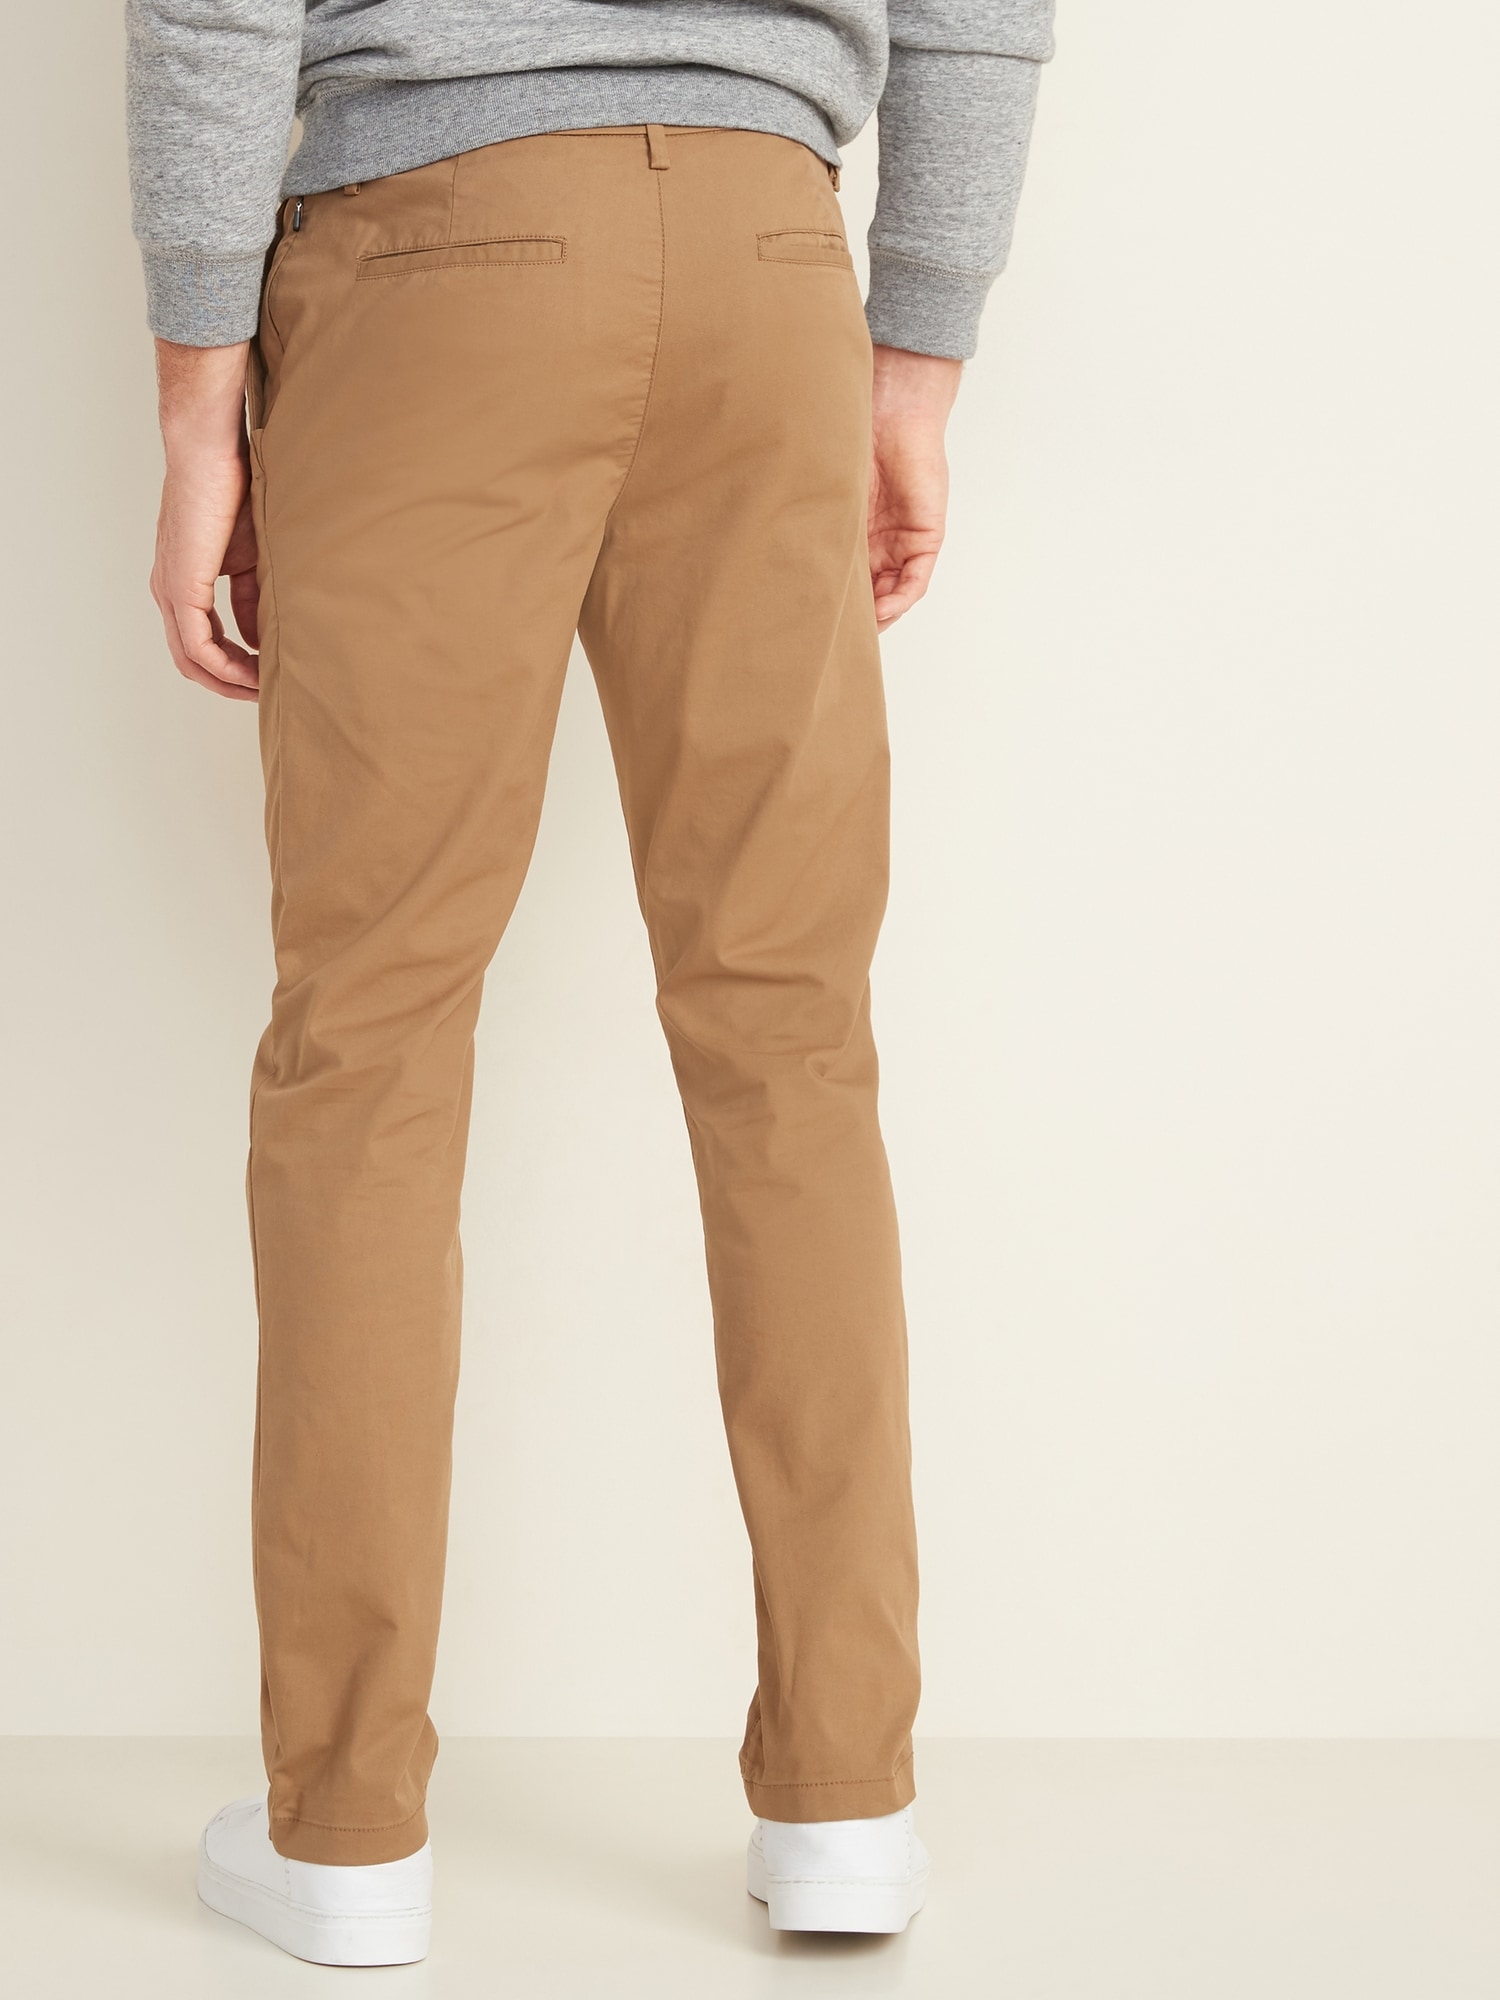 Athletic BuiltIn Flex Rotation Chino Pants for Men  Old Navy